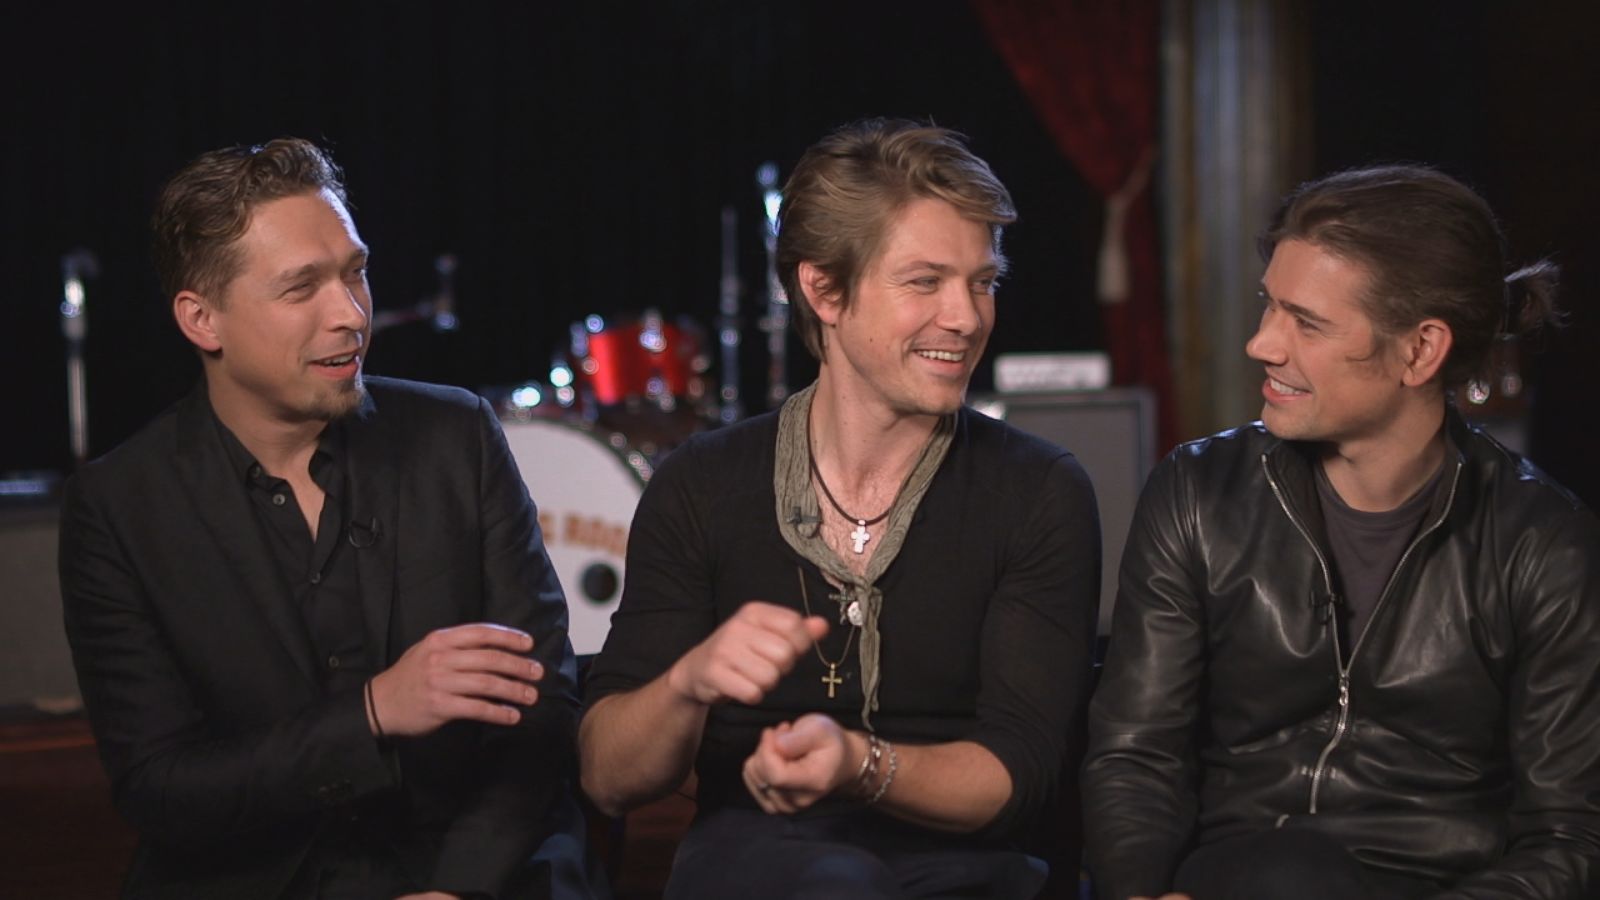 Hanson Talks Building a Relationship With Fans & MMMBop Legacy